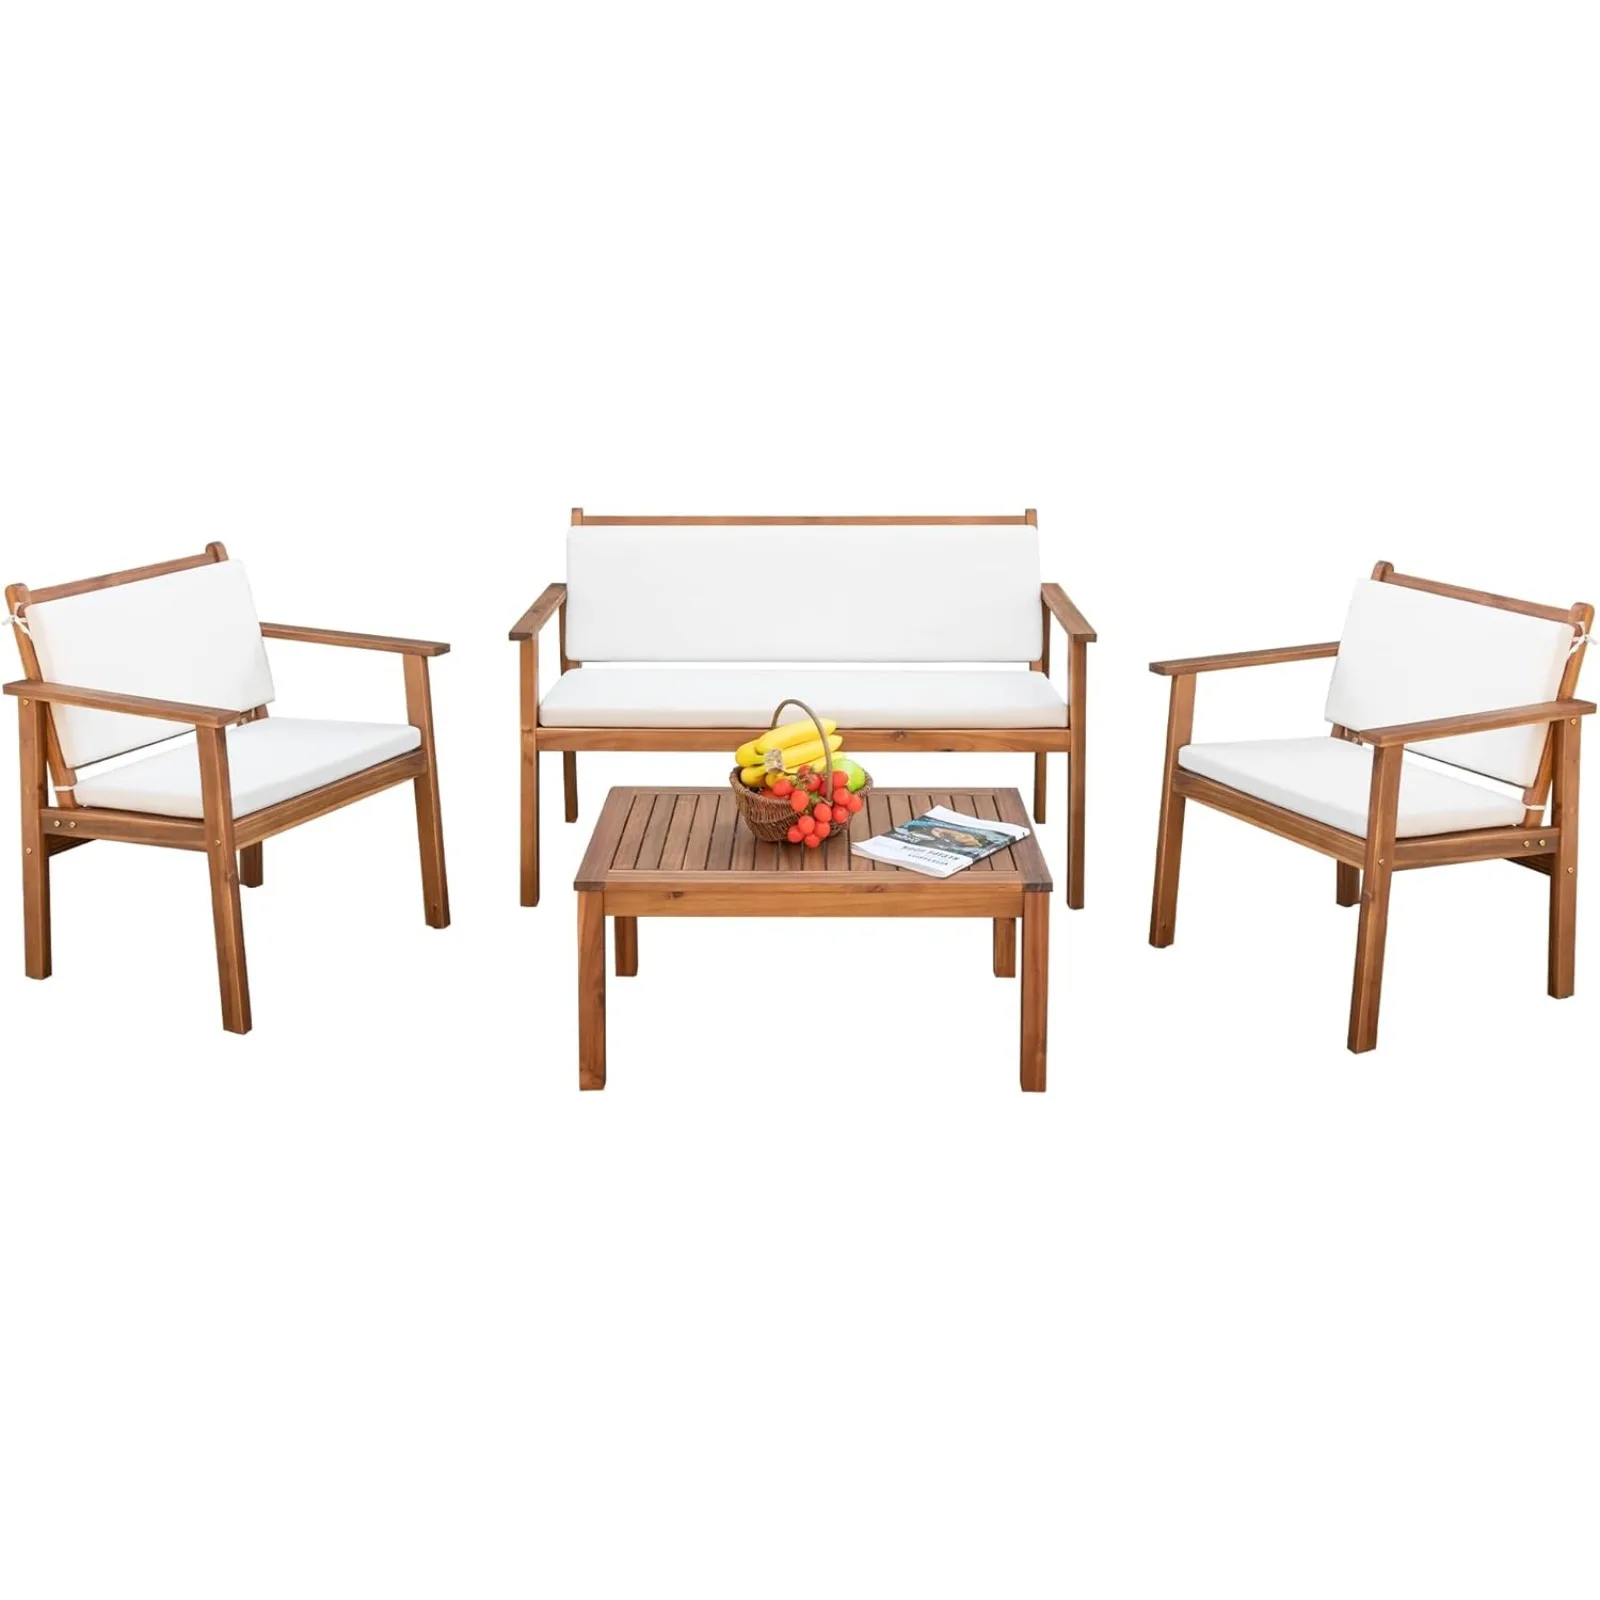 

US Patio Furniture 4 Piece Acacia Wood Outdoor Conversation Sofa Set with Table & Cushions Porch Chair